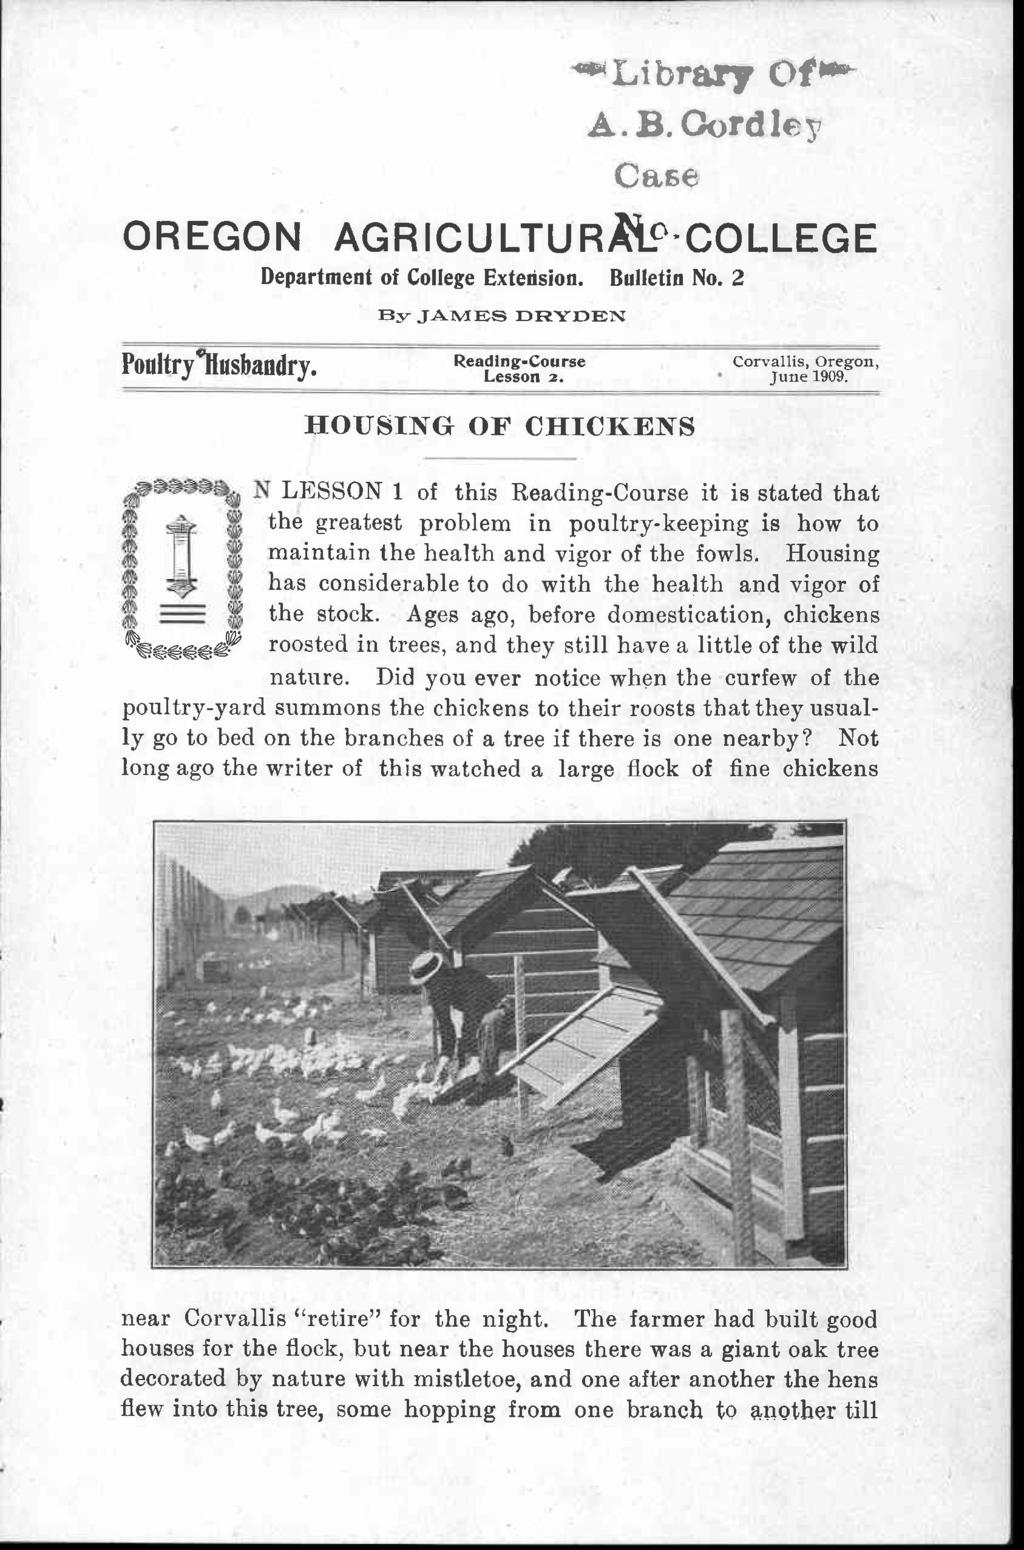 440 i brary Of's Case OREGON AGRICULTURAP-COLLEGE Department of College Extension. Bulletin No. 2 Ey-JAMES DRYDEN 37 -A. B. Cord 1e Poultryllusbandry. Reading-Course Lesson 2.